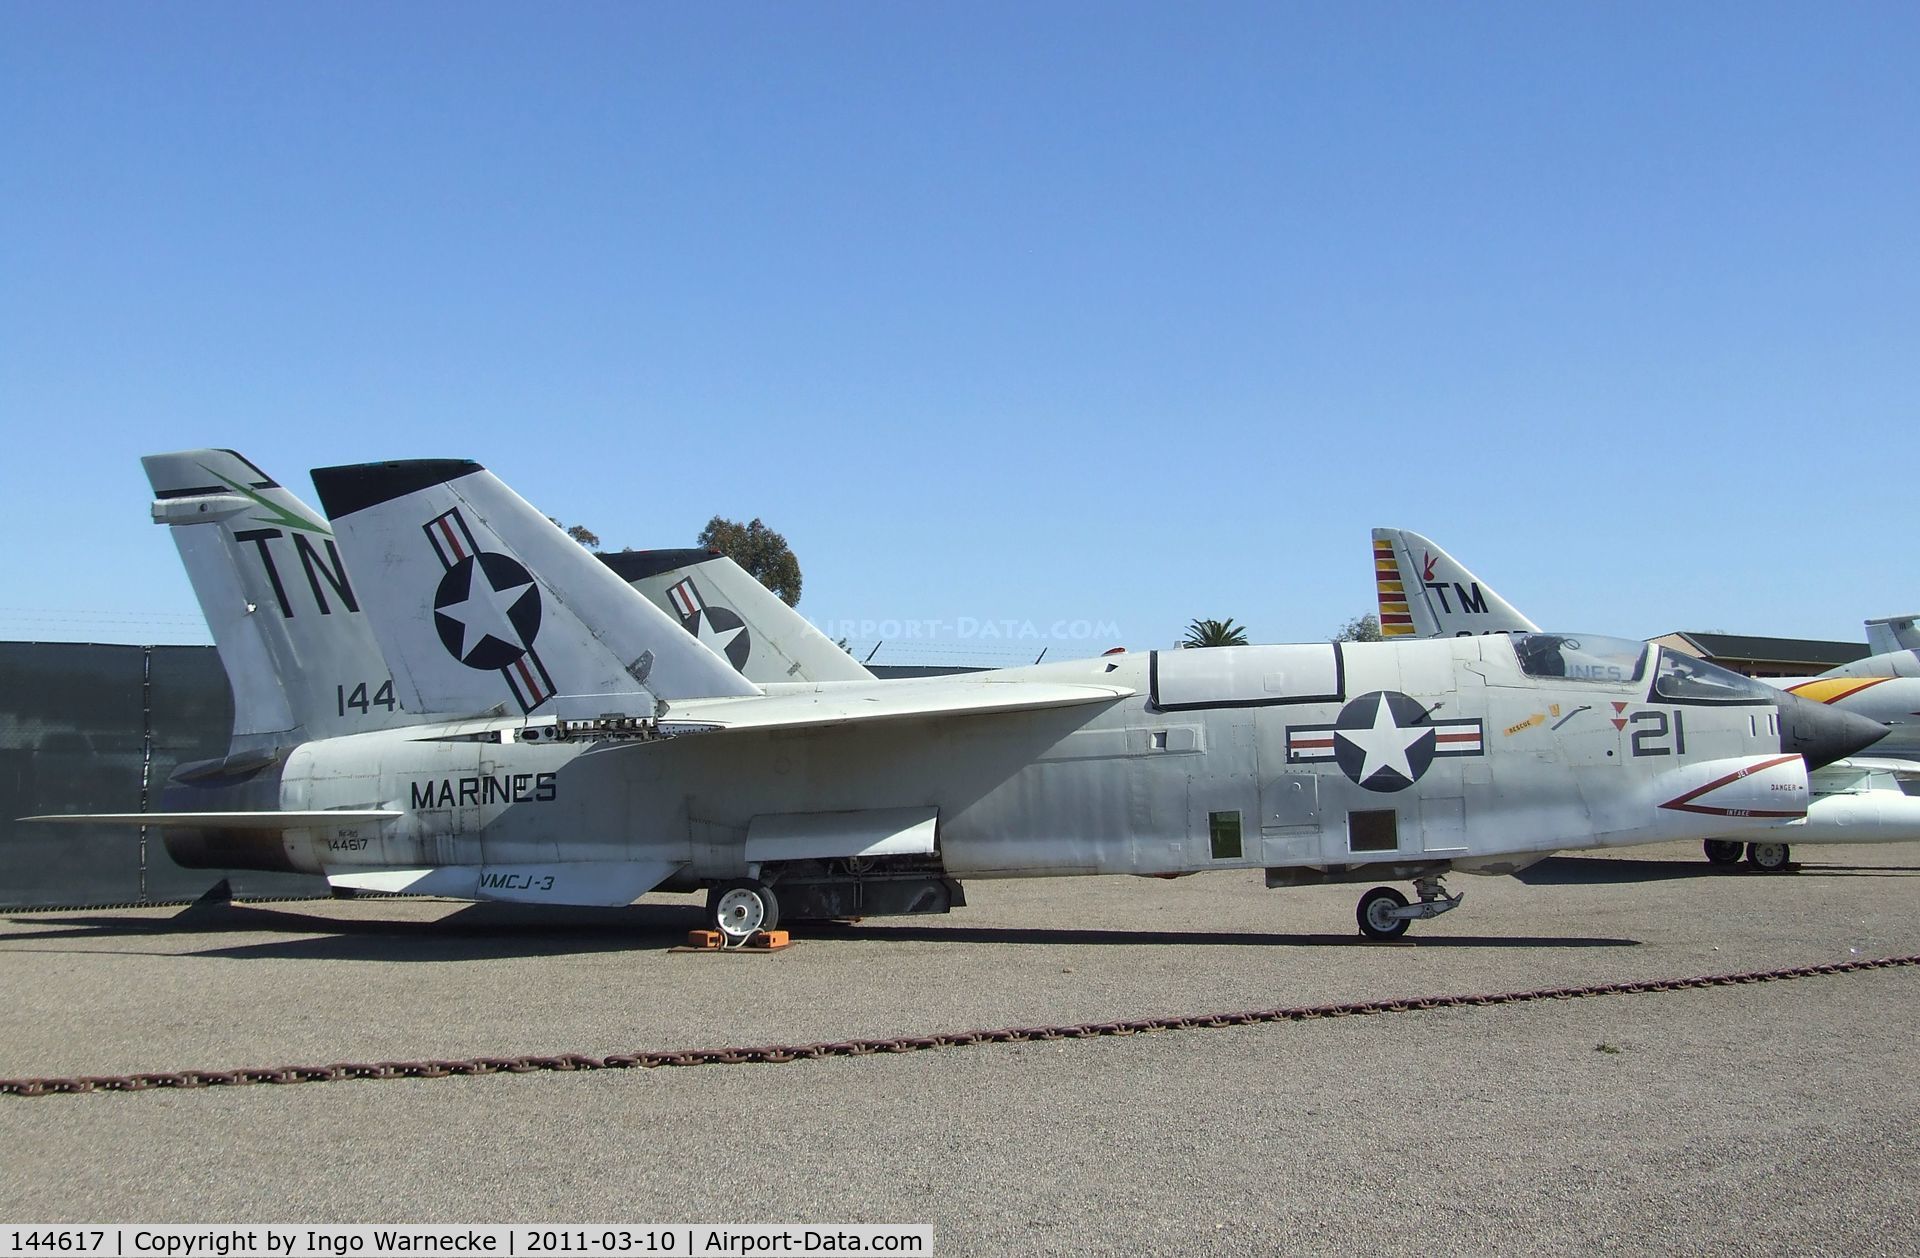 144617, Vought RF-8A Crusader C/N 5533, Vought RF-8G Crusader at the Flying Leatherneck Aviation Museum, Miramar CA